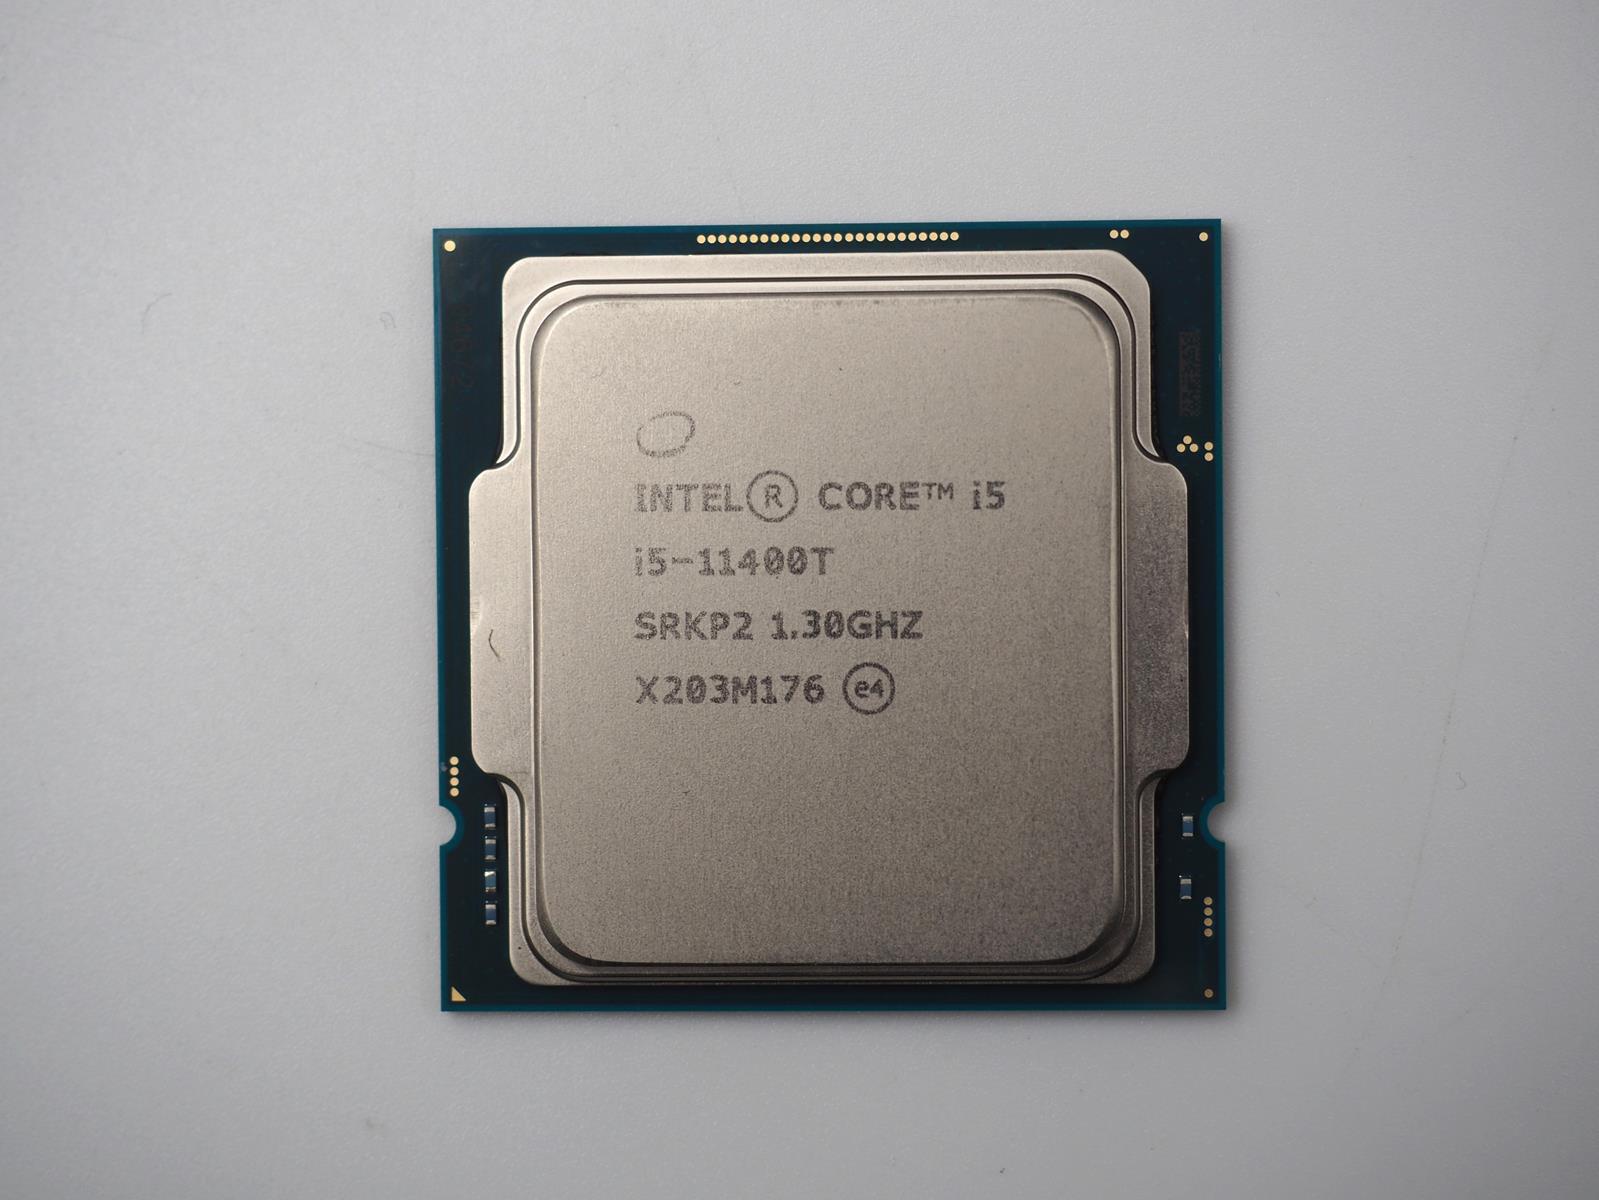 INTEL CORE I5-11400T 1.30GHz FCLGA1200 CPU Processor Tested Working